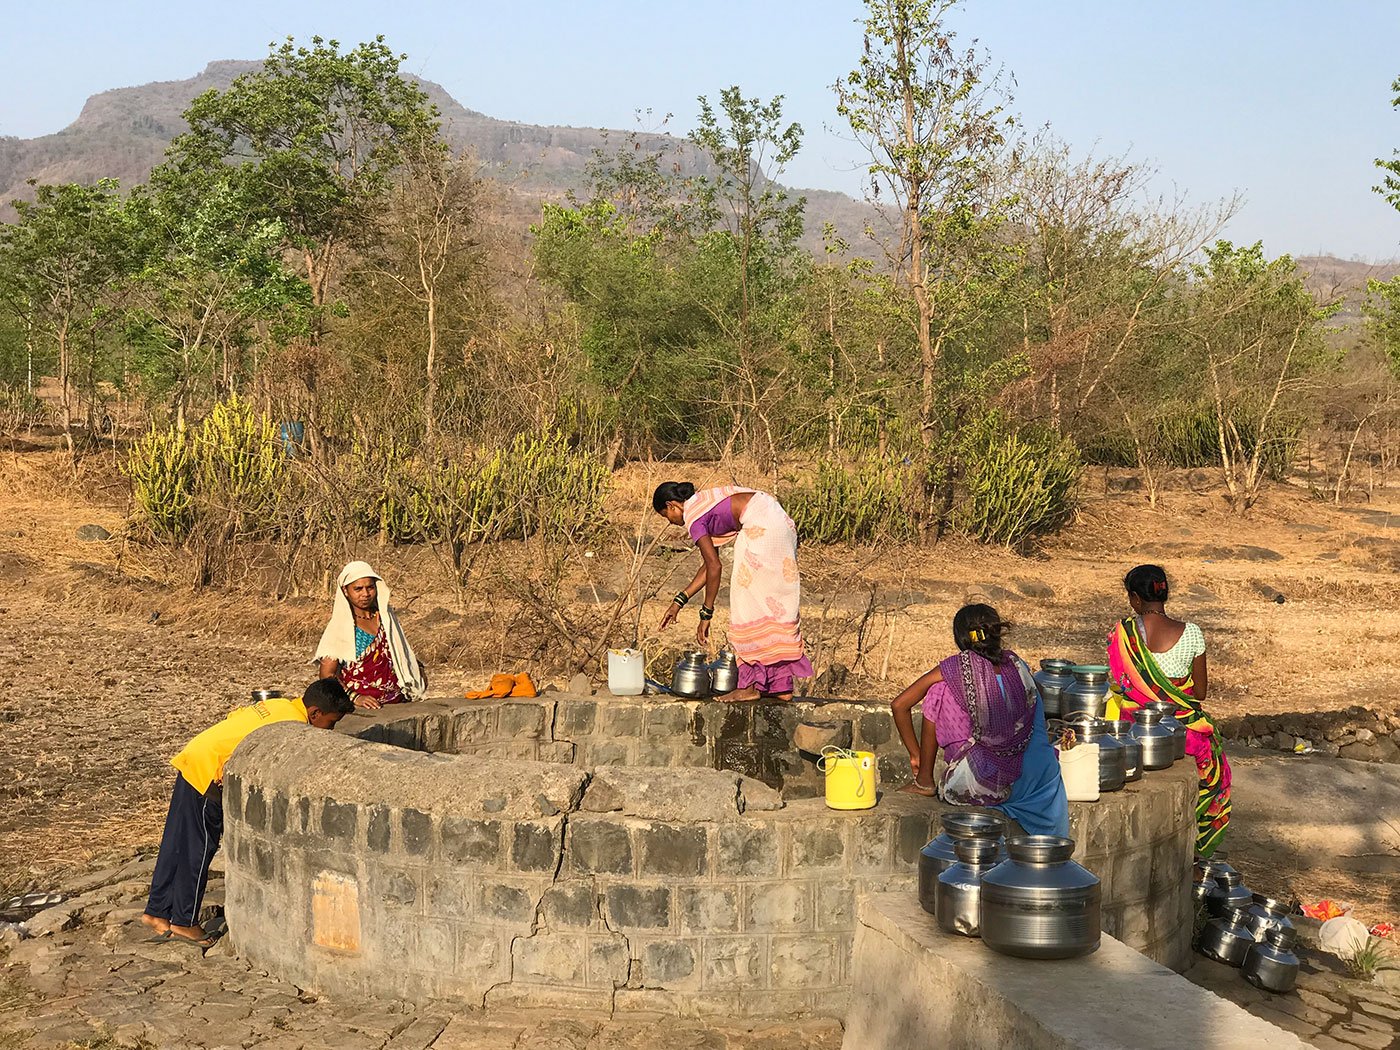 Women gathered near the well i.e 3km away from Galtare to collect water